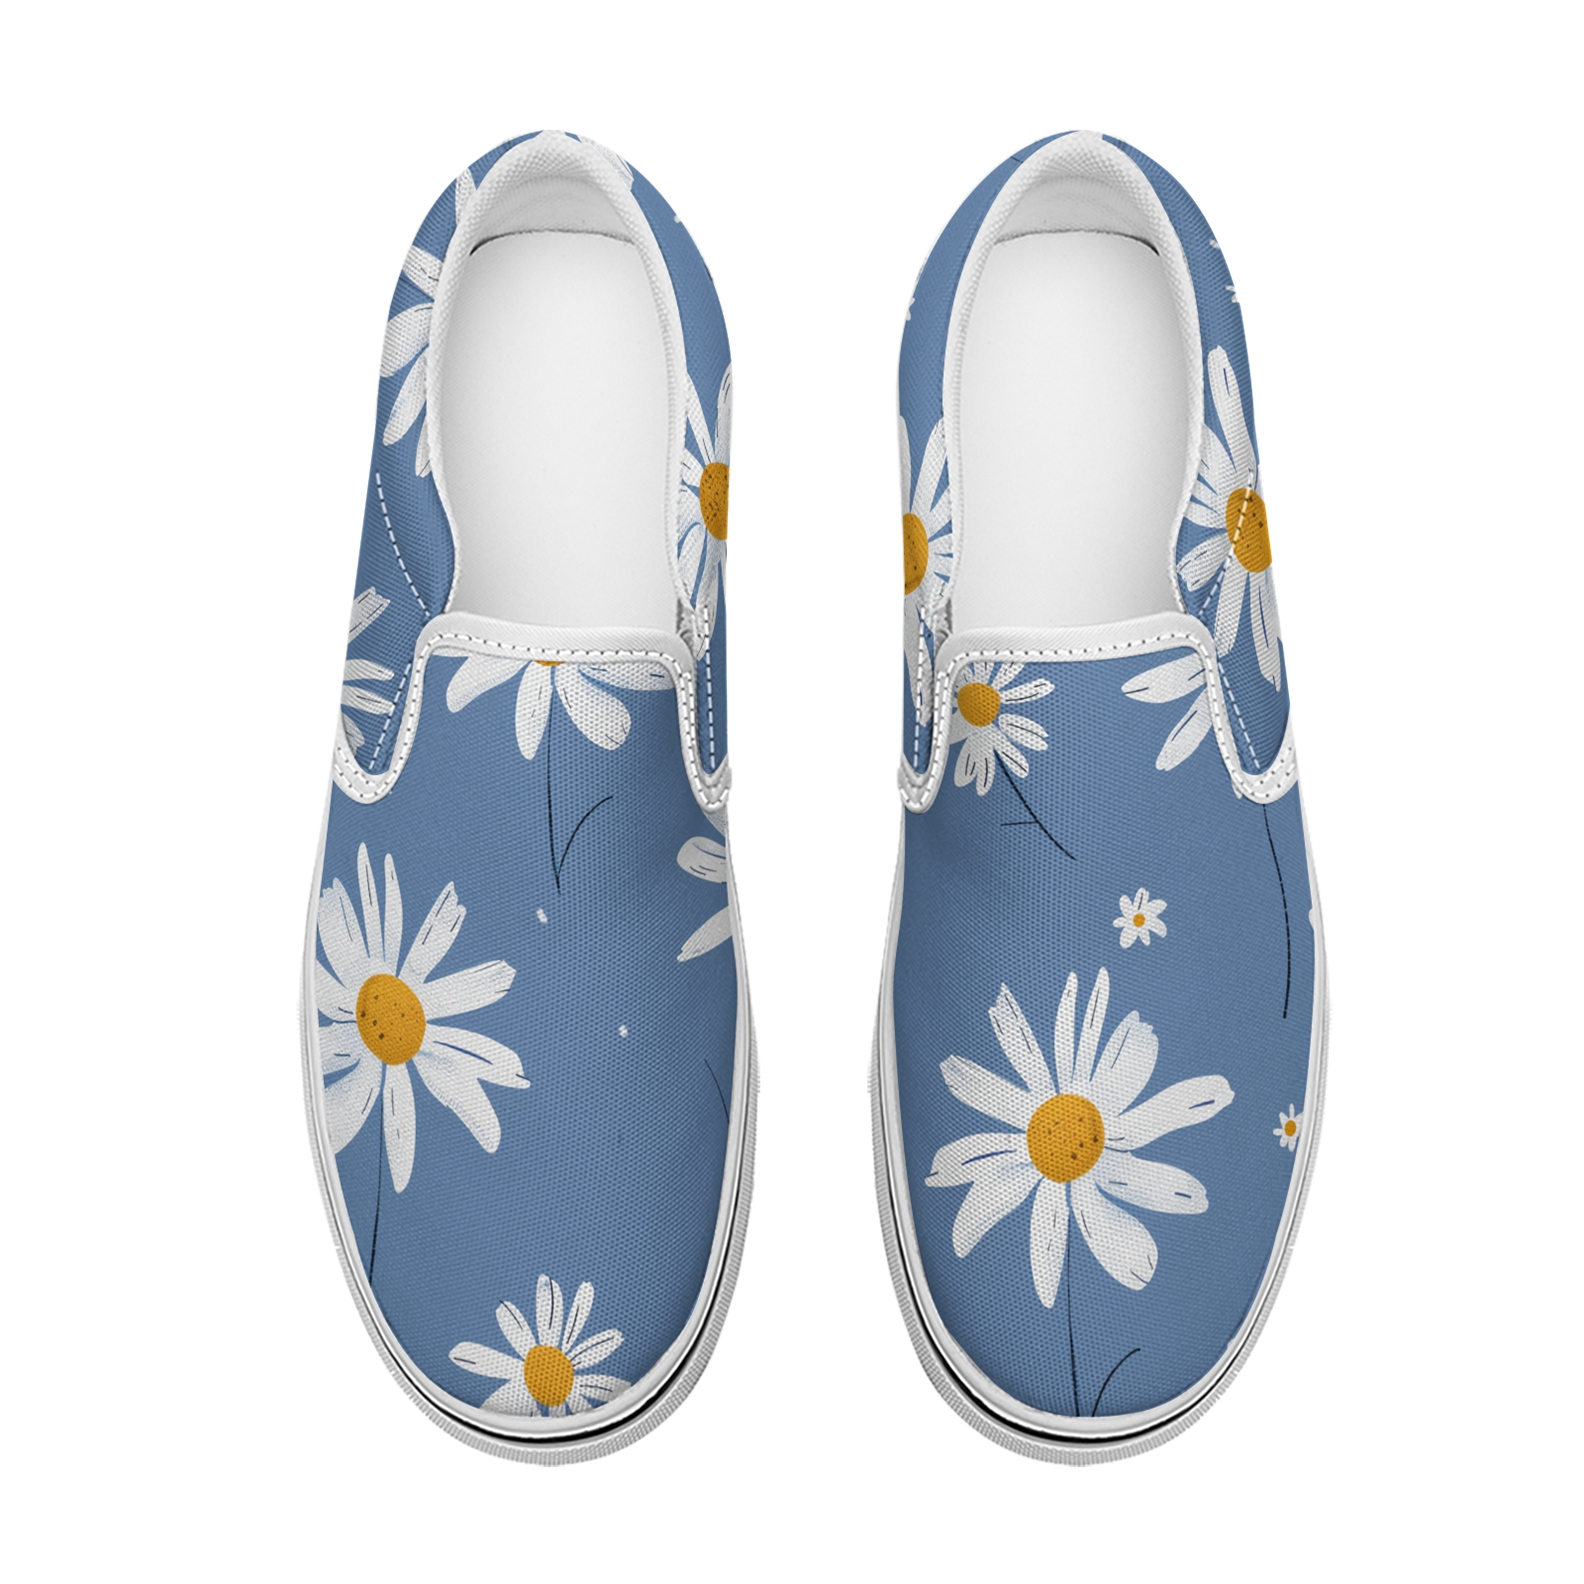 Women's fashion small fresh Daisy print canvas shoes slippers Low top casual walking shoes classic comfortable flat fashion sneakers